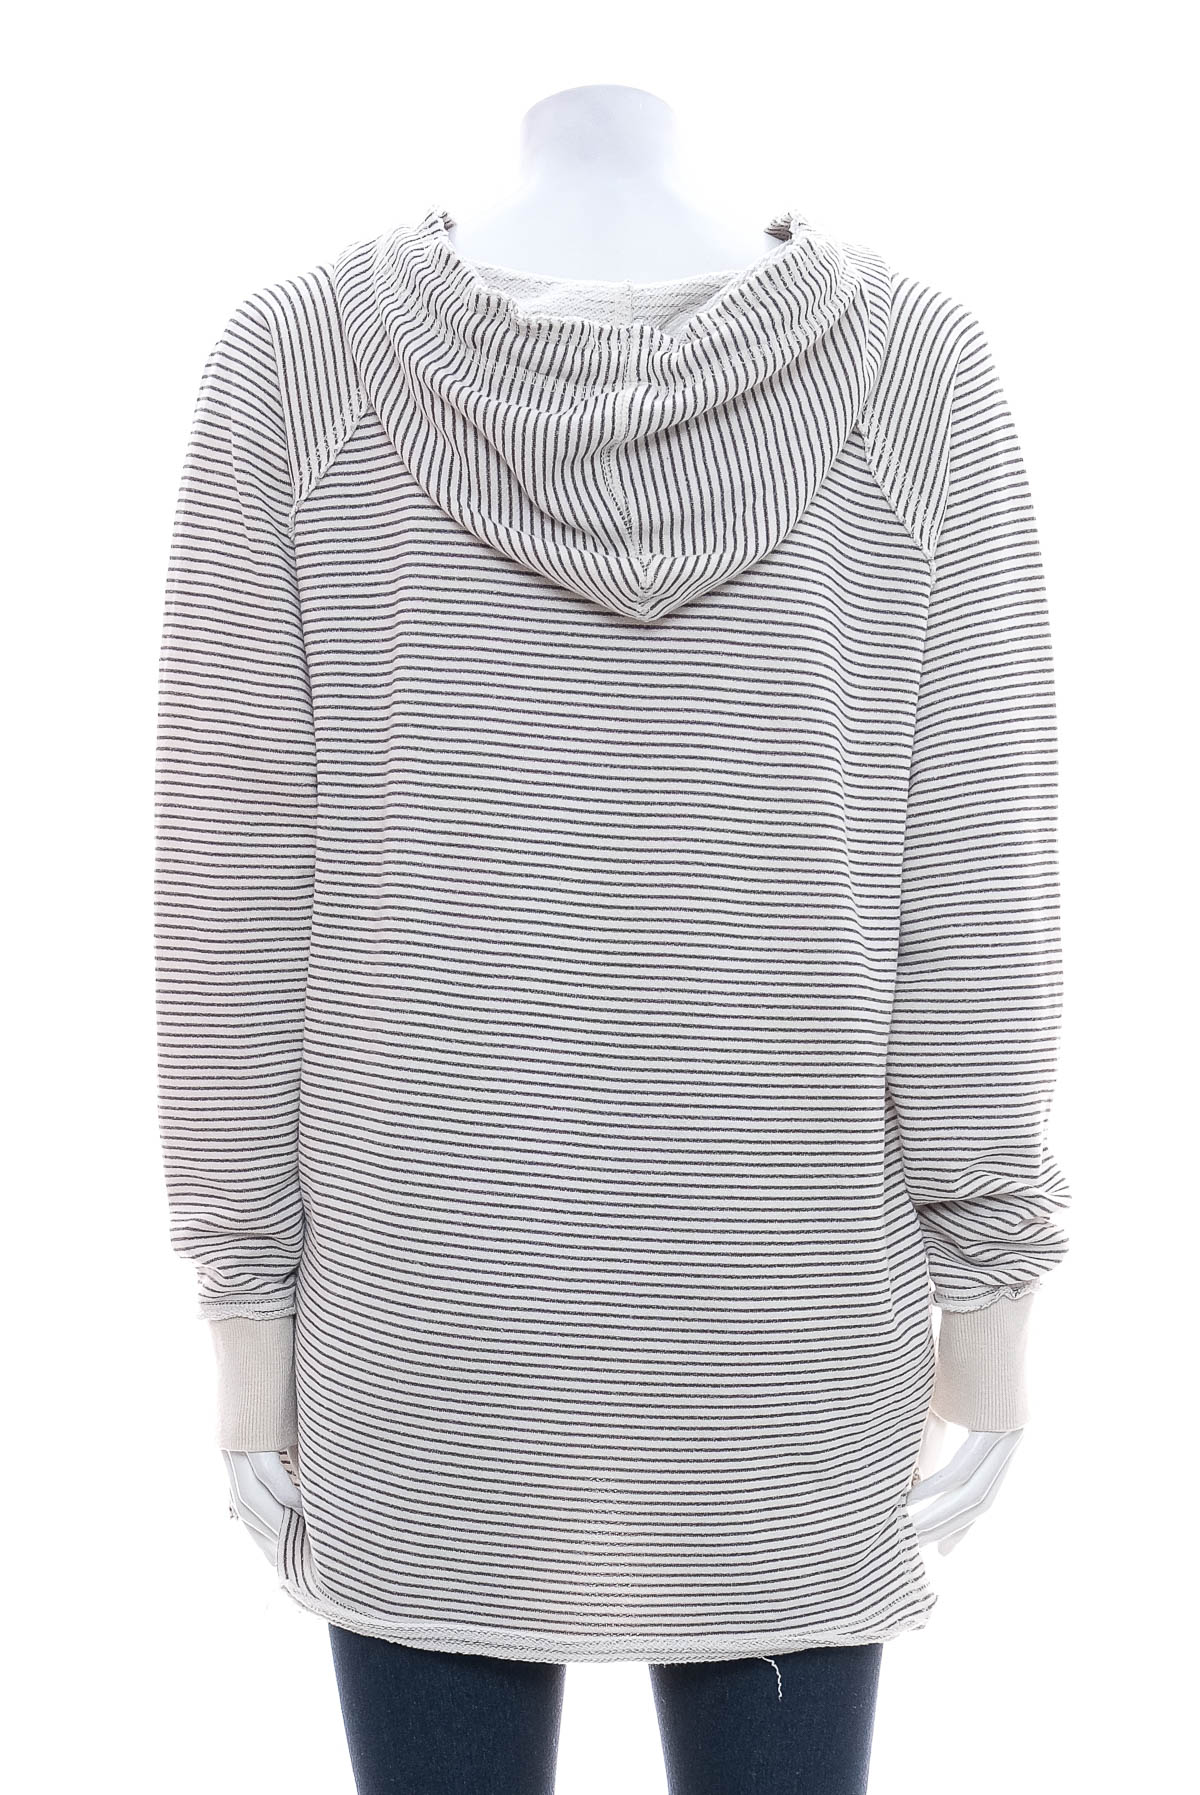 Women's sweater - Southpointe by Baypointe - 1